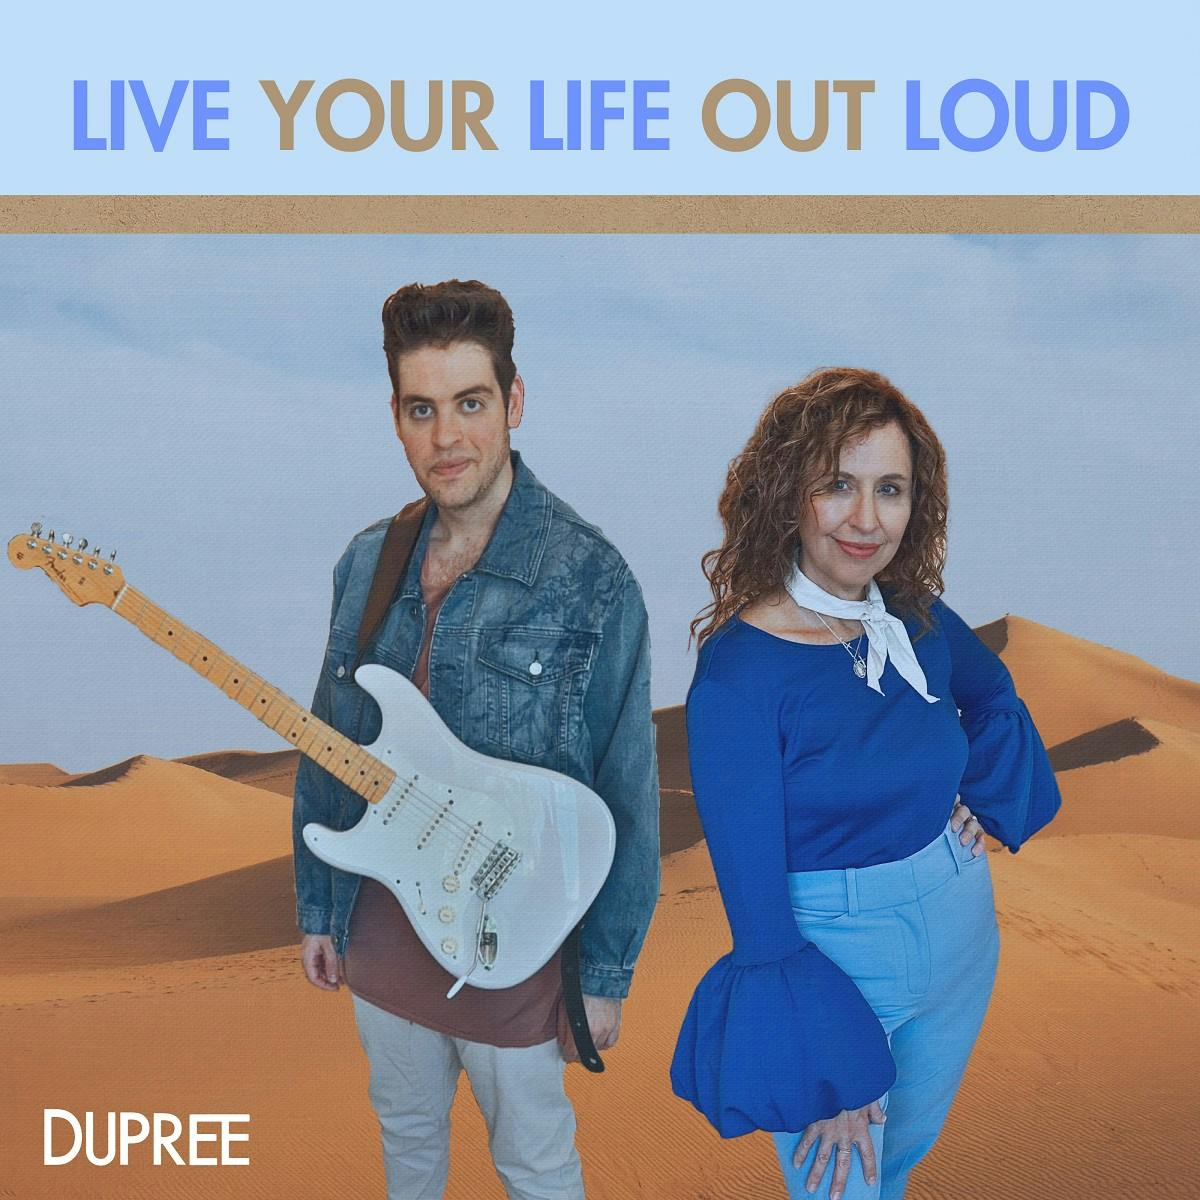 Hear the new album DUPREE debuted at World Youth Day